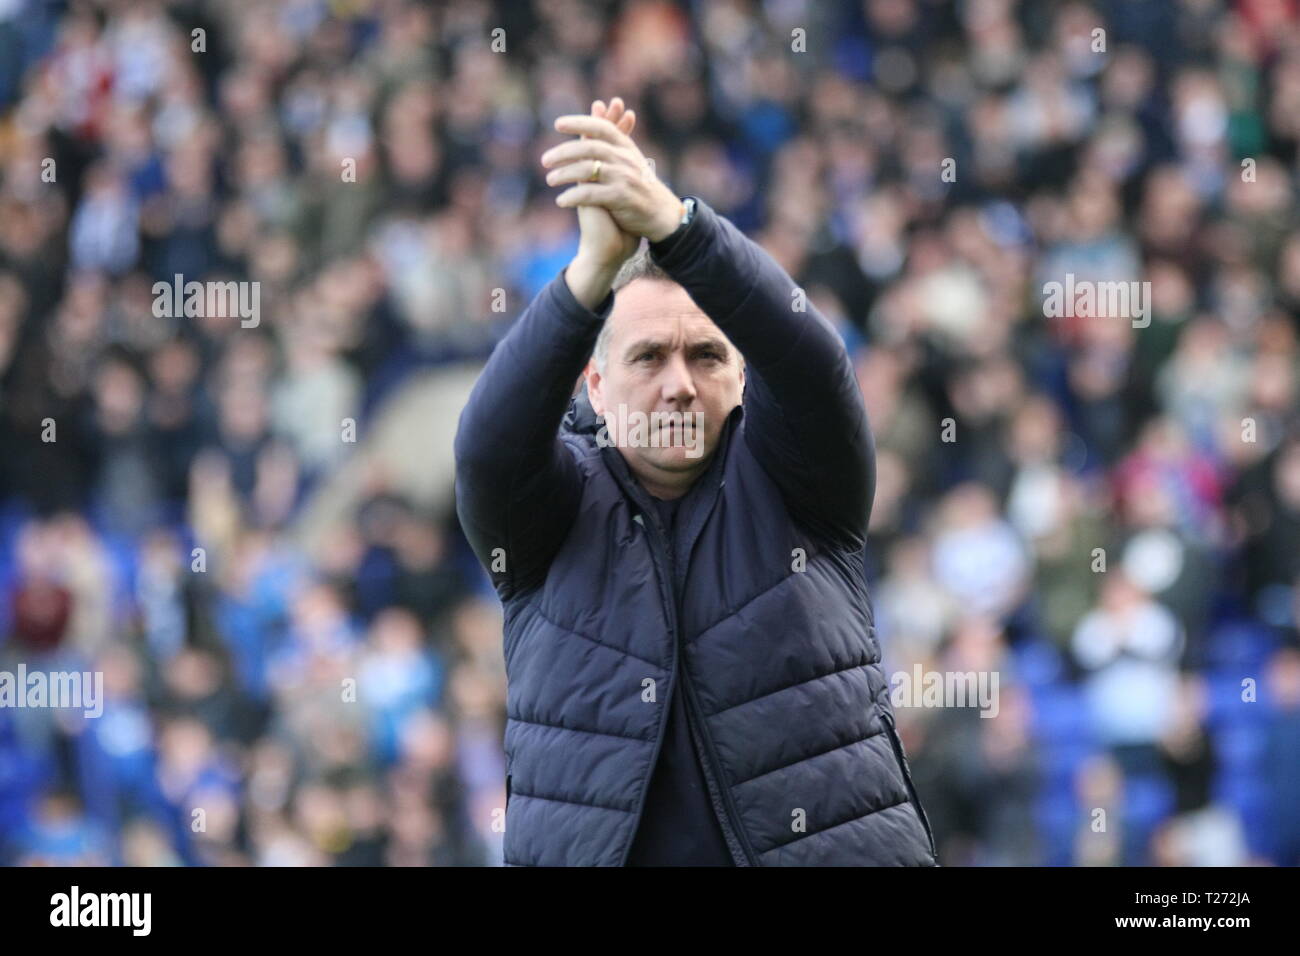 Birkenhead, Wirral, UK. 30th March, 2019. Tranmere Rovers Manager Micky Mellon applauds Tranmere fans ahead of the EFL League Two match with Carlisle United at Prenton Park which Tranmere Rovers won 3-0. Stock Photo